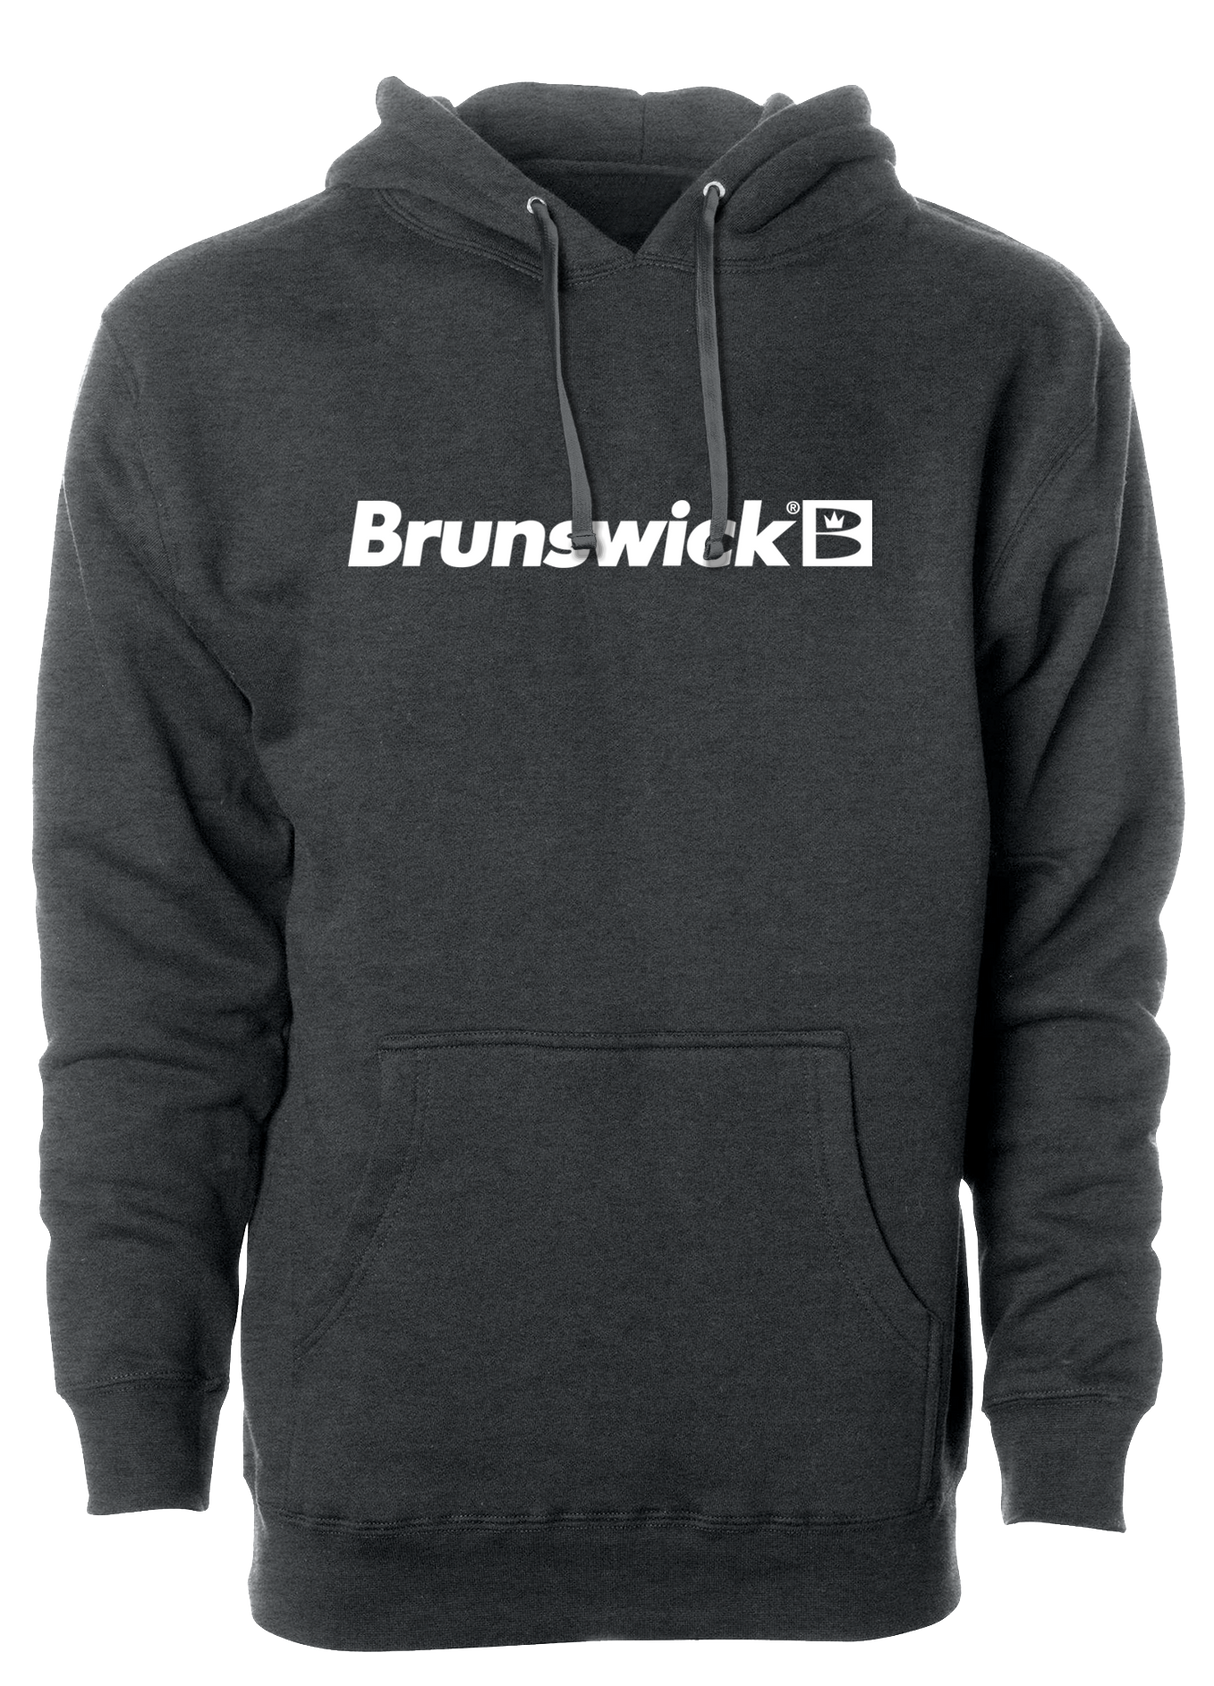 Keep warm in this stylish Brunswick Classic Logo design hooded sweatshirt. 60/40 cotton/polyester blend material Standard Fit  Front pouch pocket Midweight Hoodie/Hooded Sweatshirt. brunswick bowling hoodie hooded sweatshirt big b team shirt comfortable clothing amazon ebay 